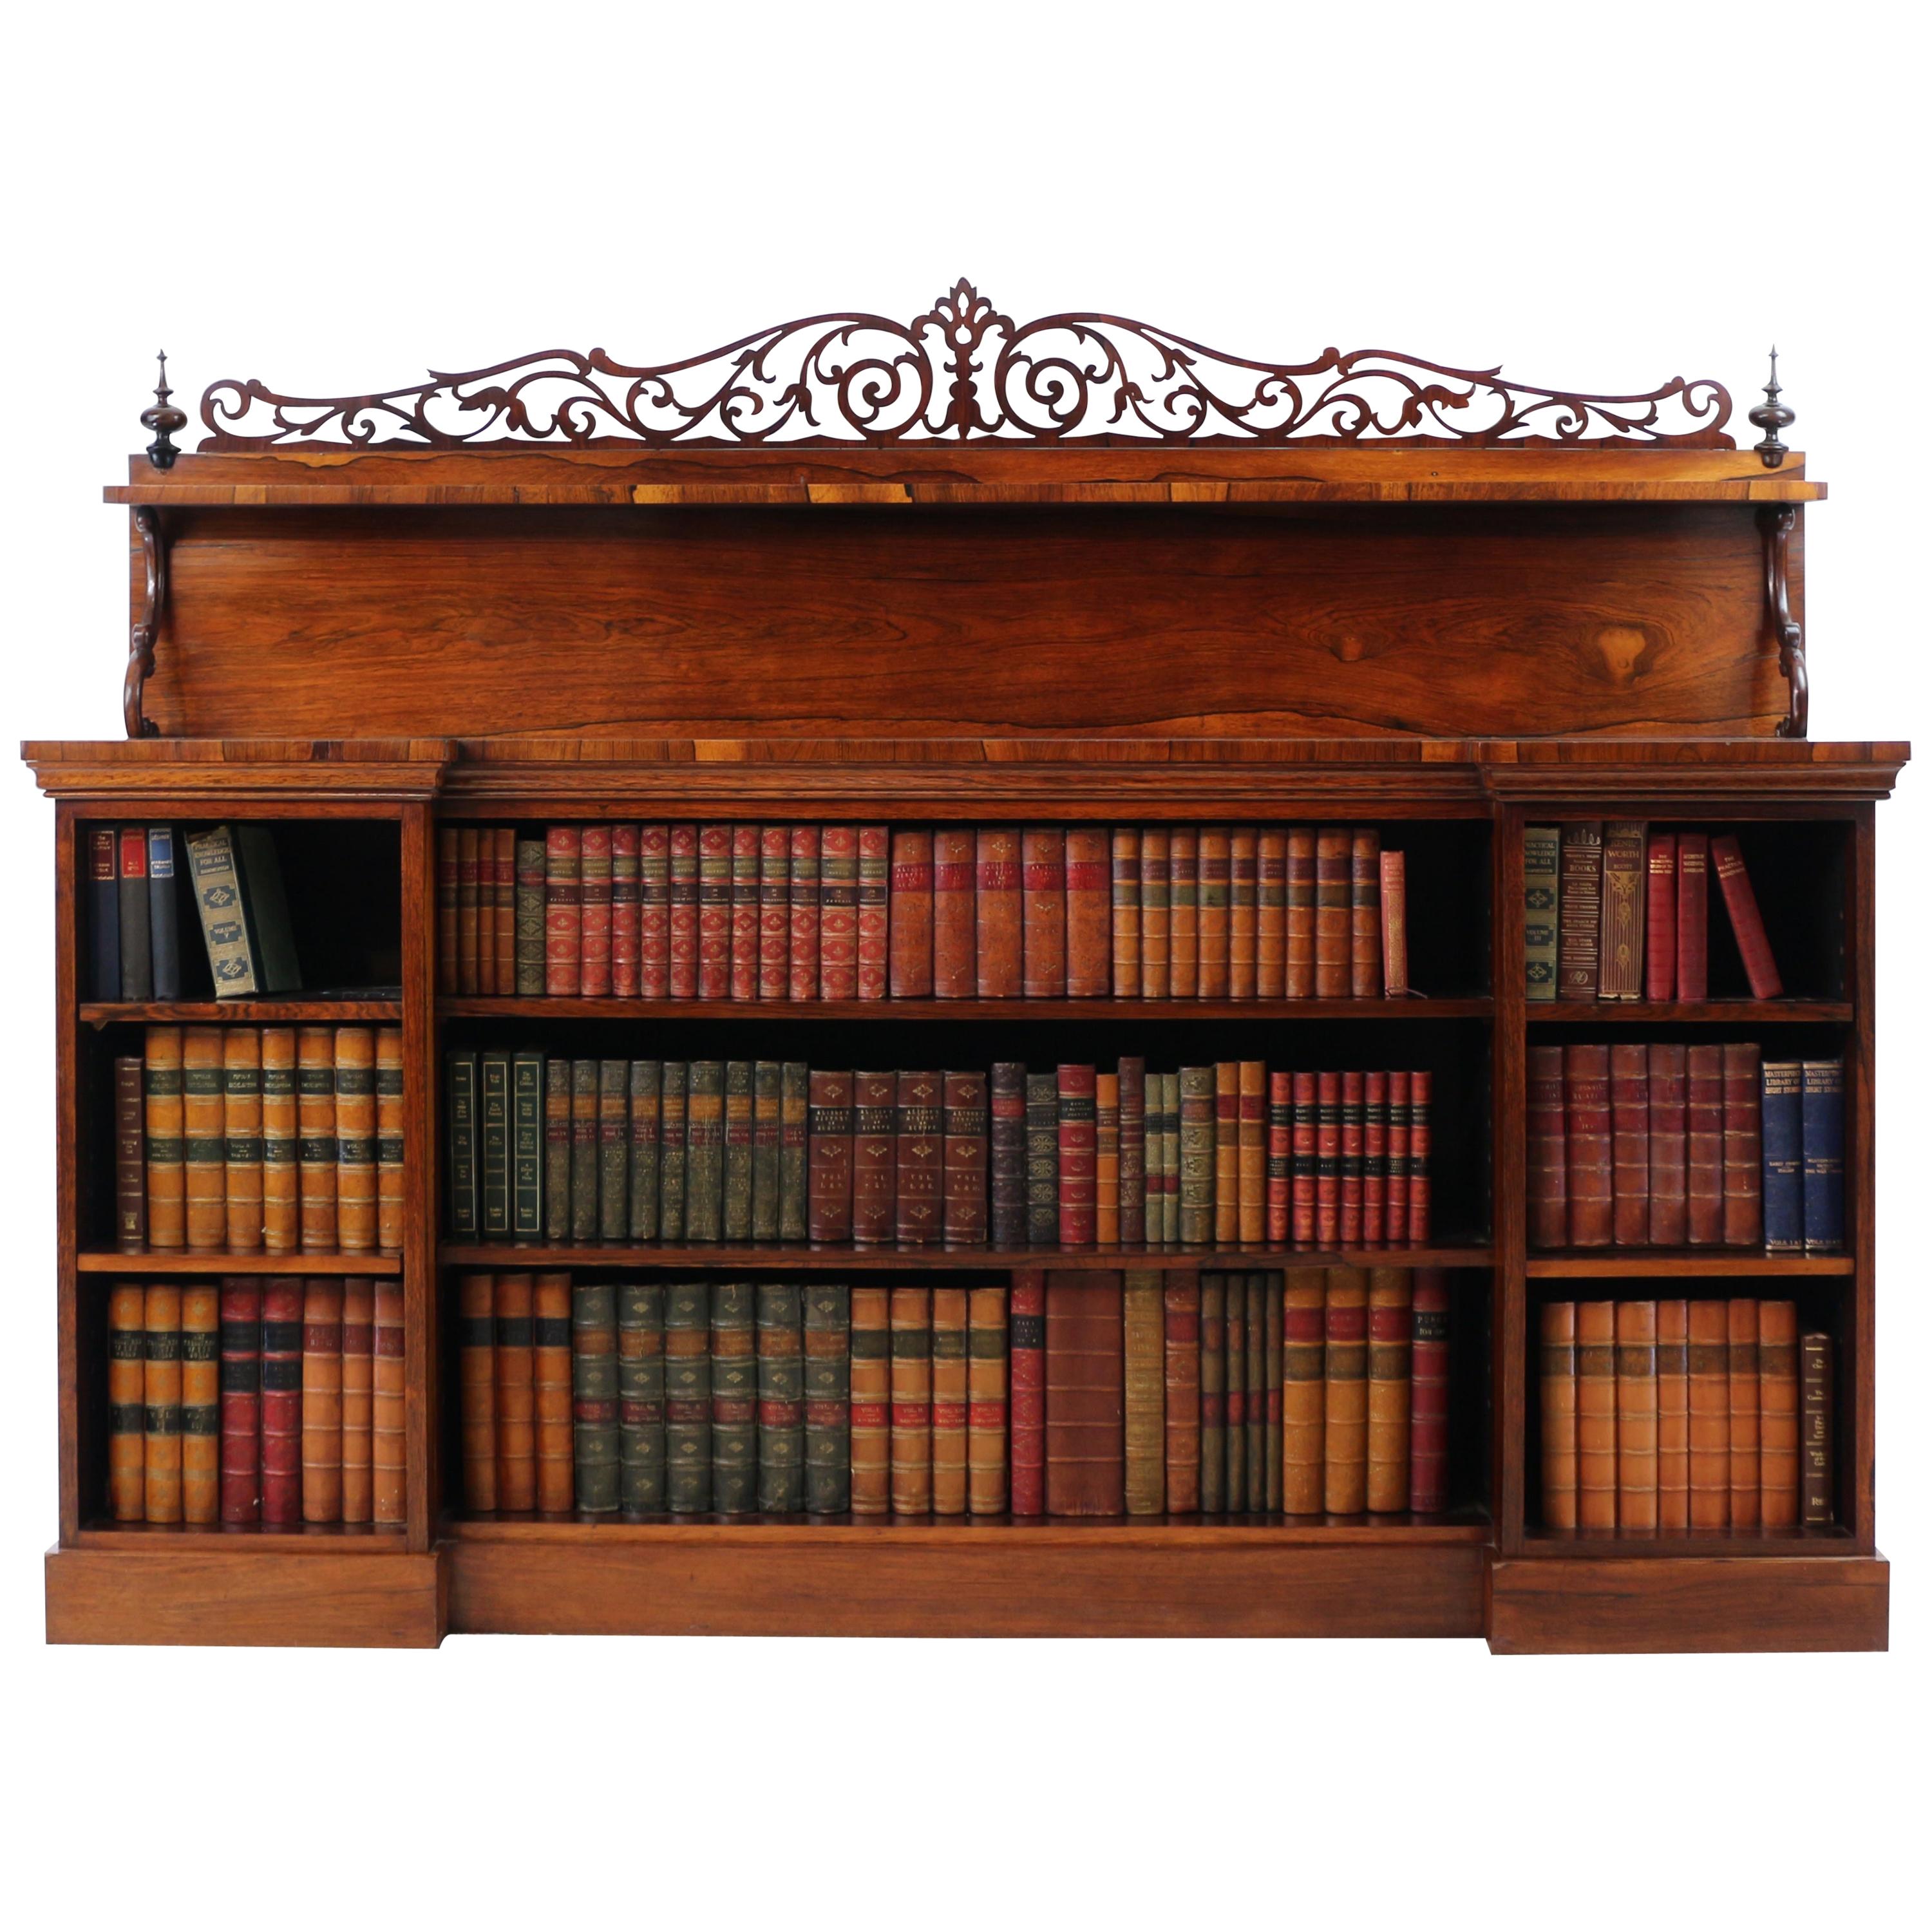 Antique English Regency Indian Rosewood Inverted Breakfront Bookcase